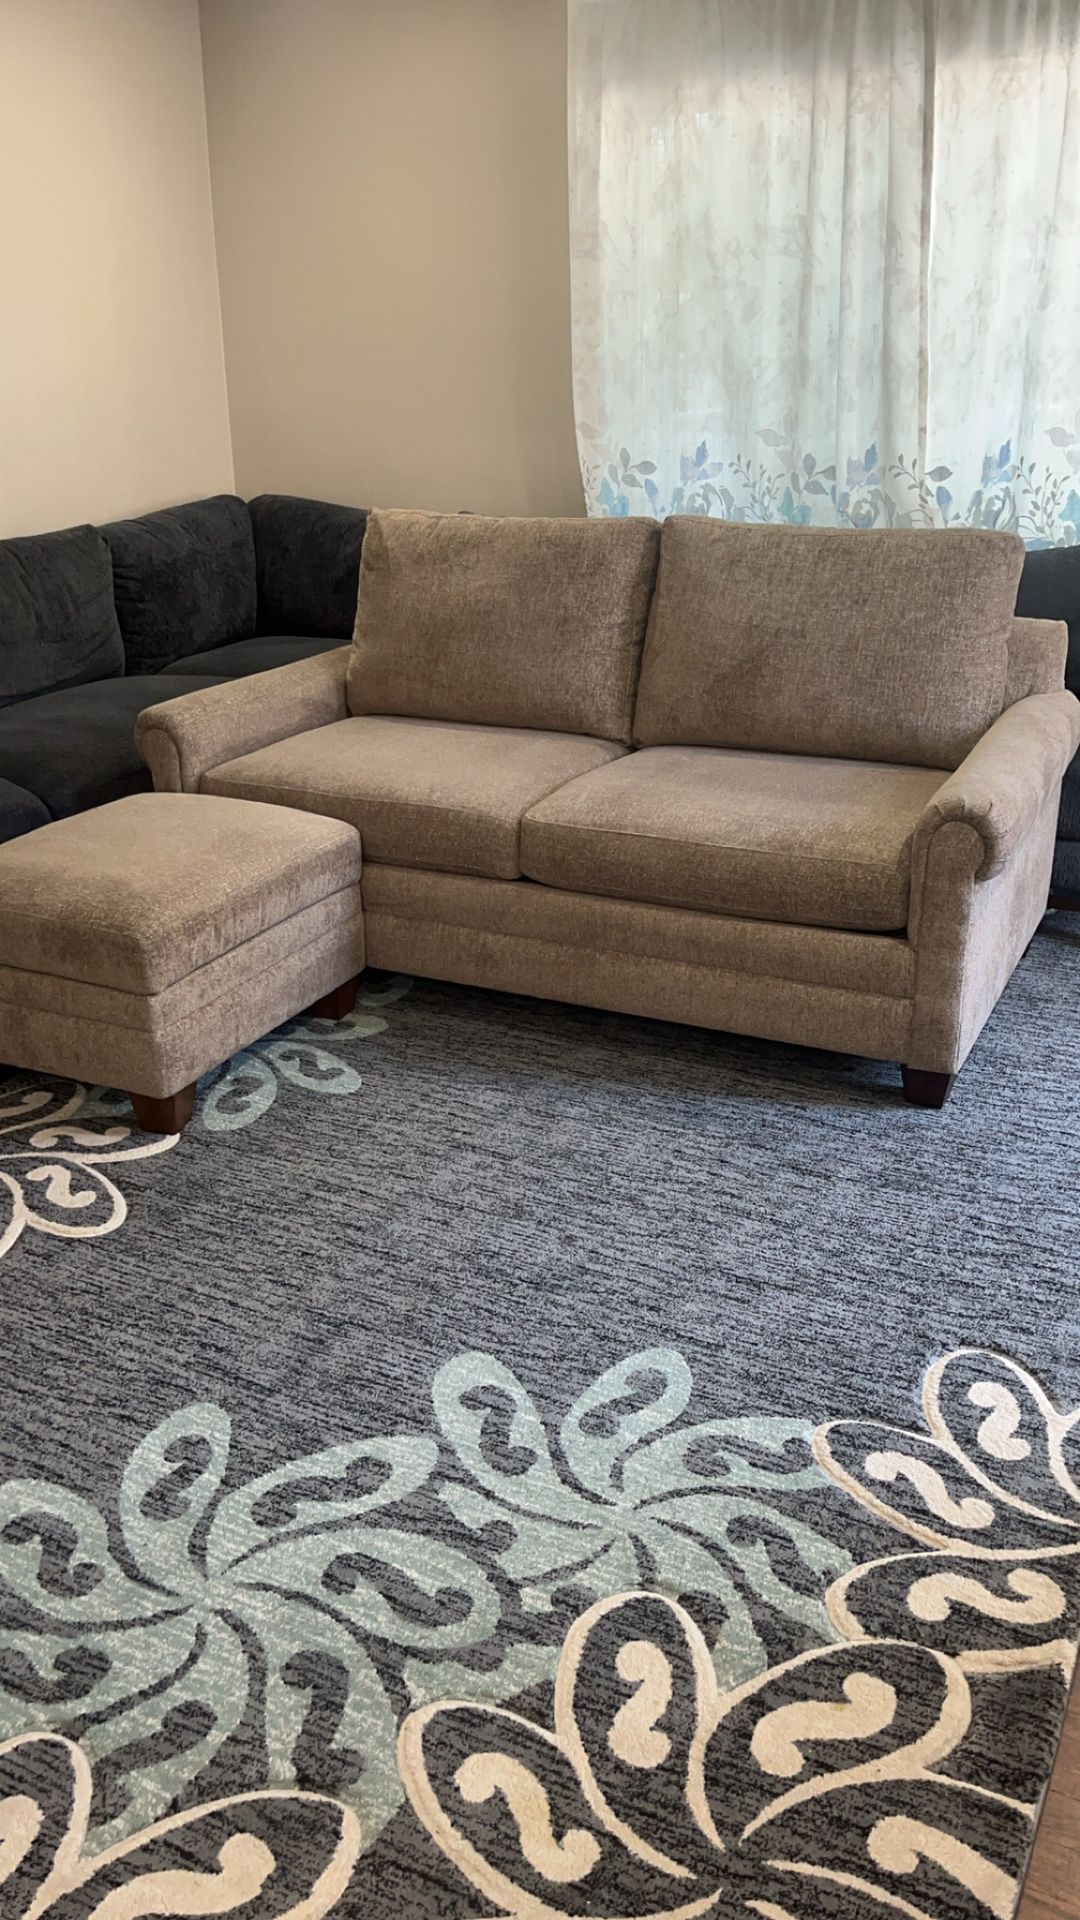 basset 2 pieace sectional couch with ottoman